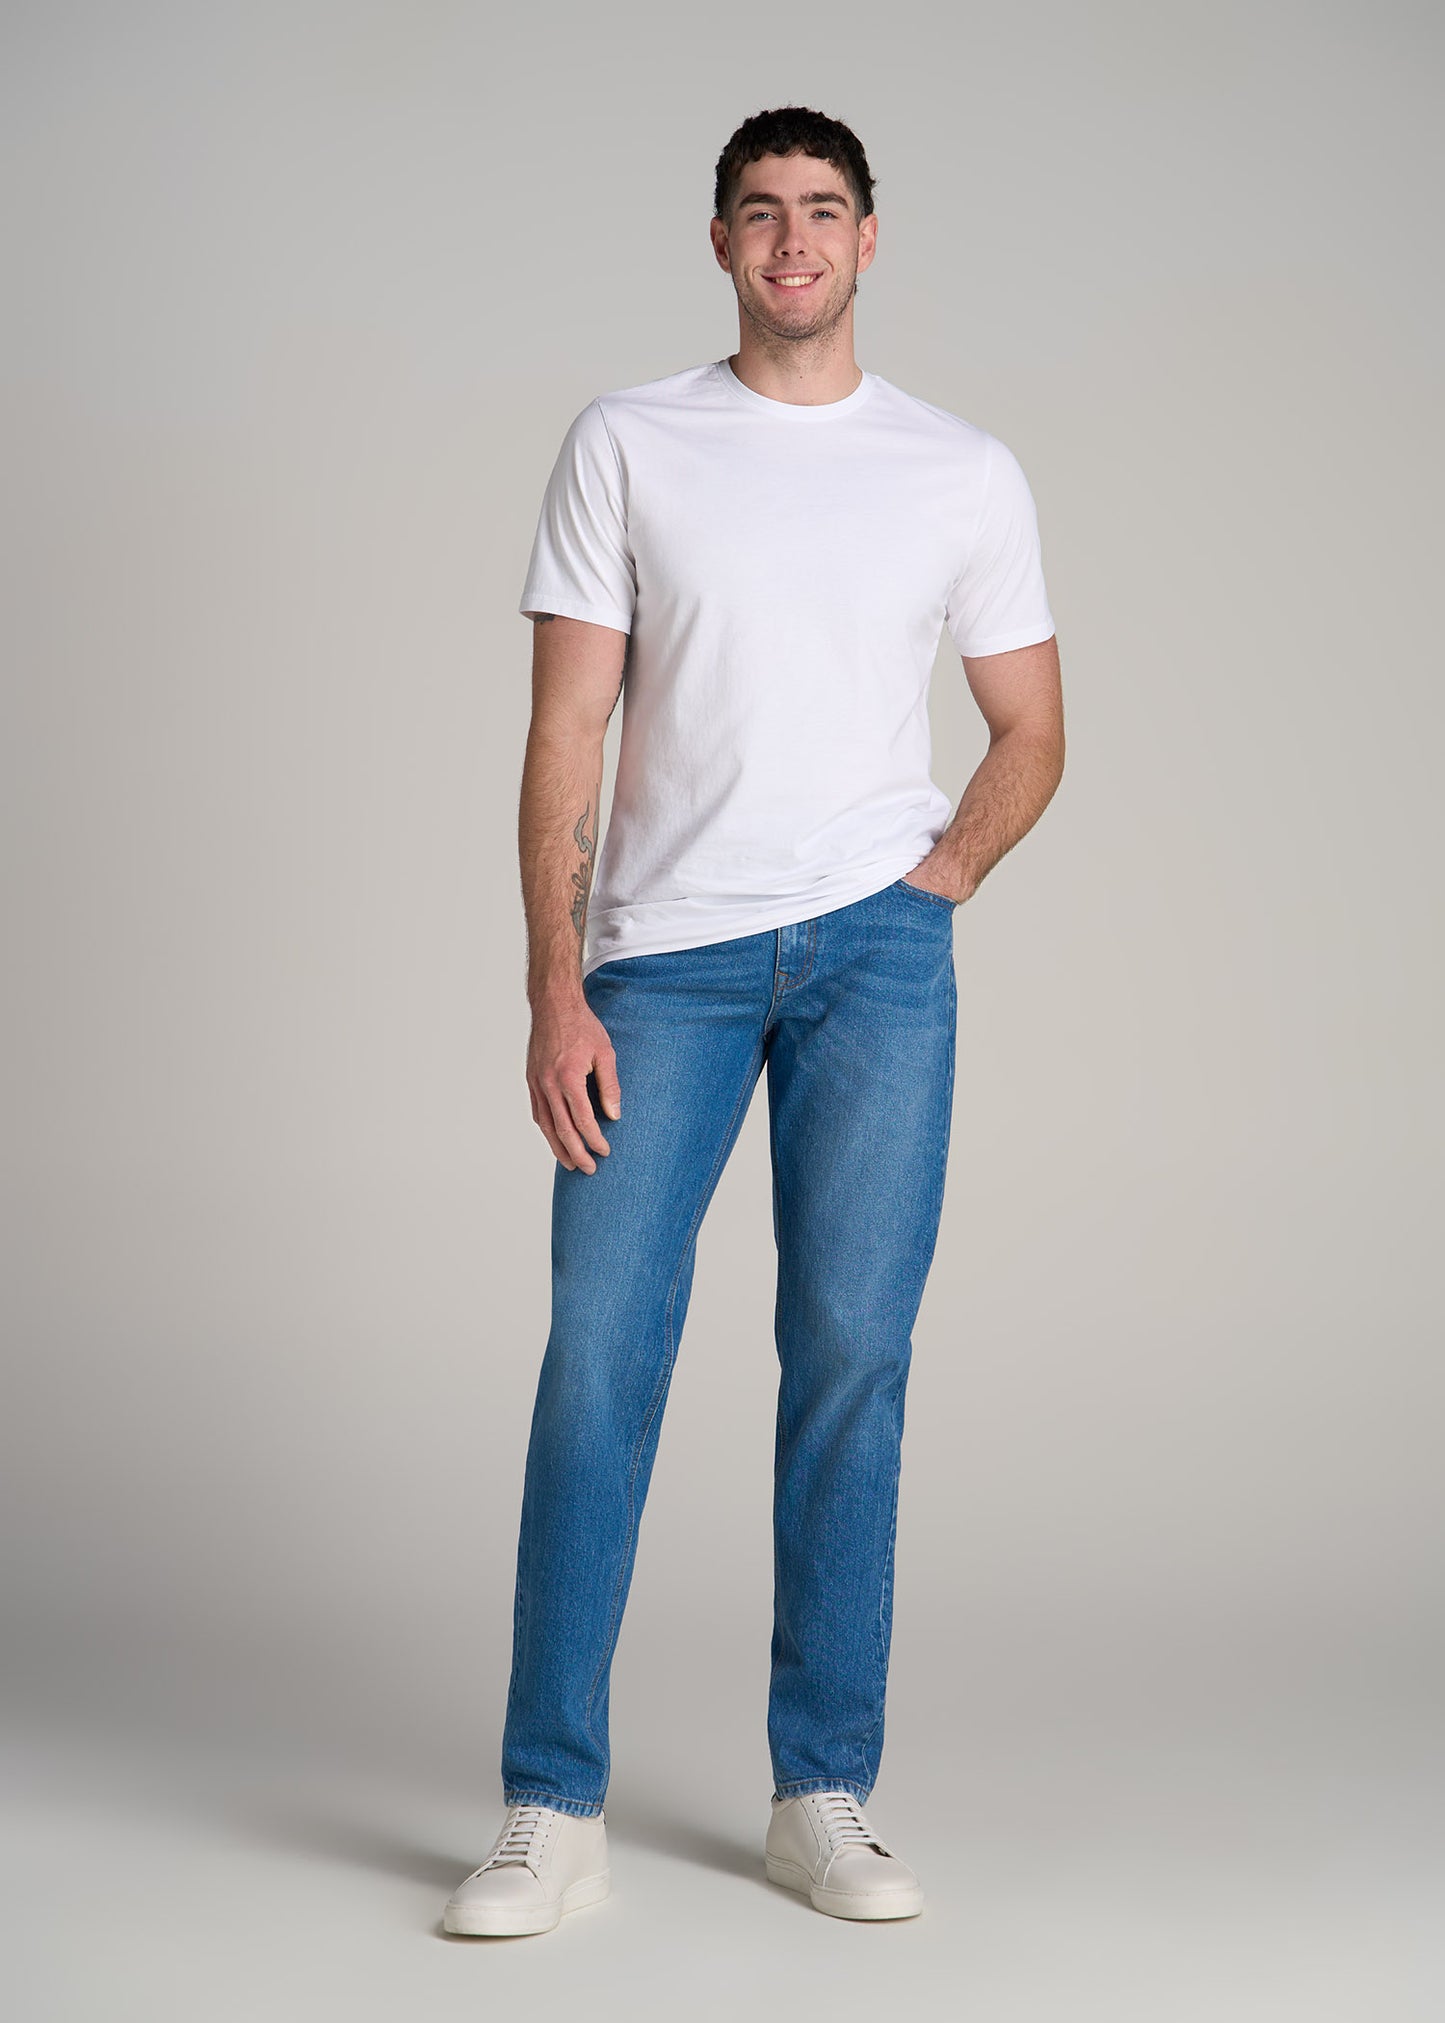 Men's Original Relaxed Fit Jeans